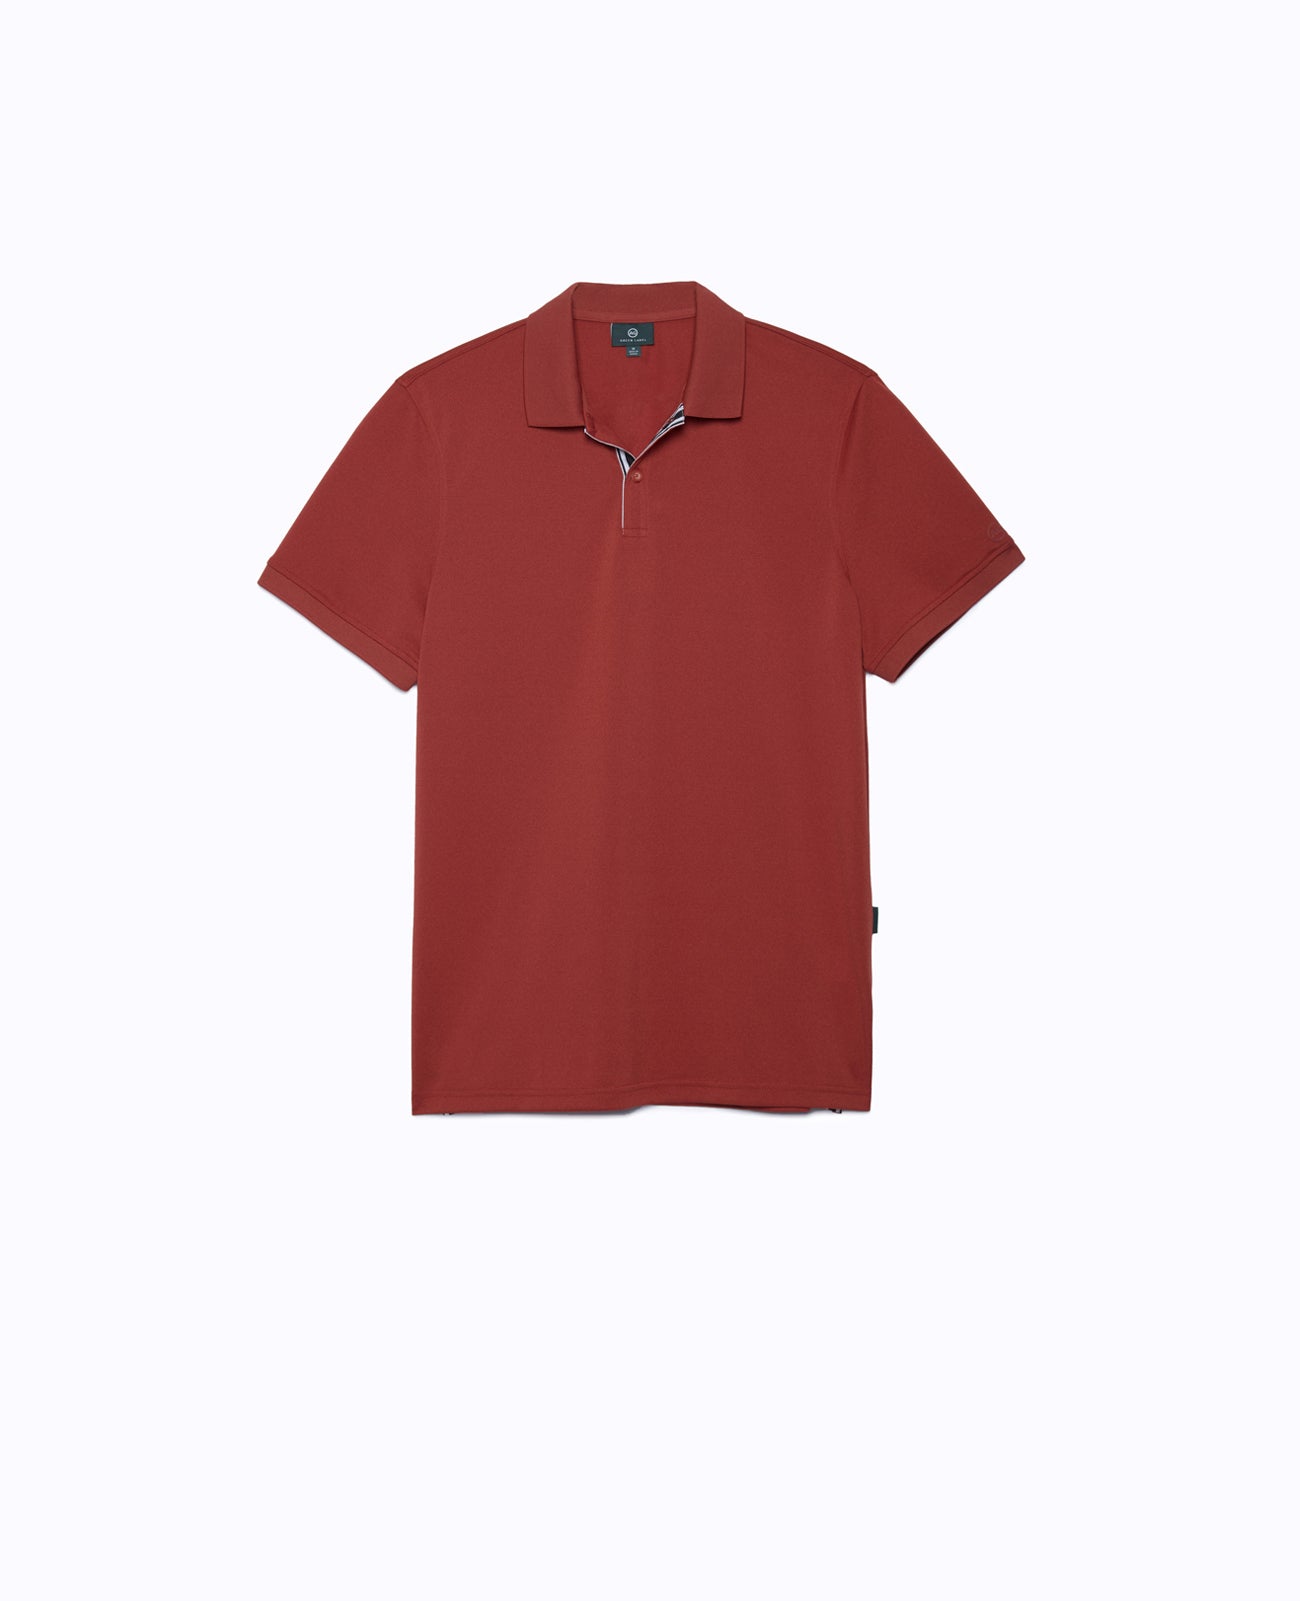 Berrian Polo Barn Red Green Label Collection Men Tops Photo 6